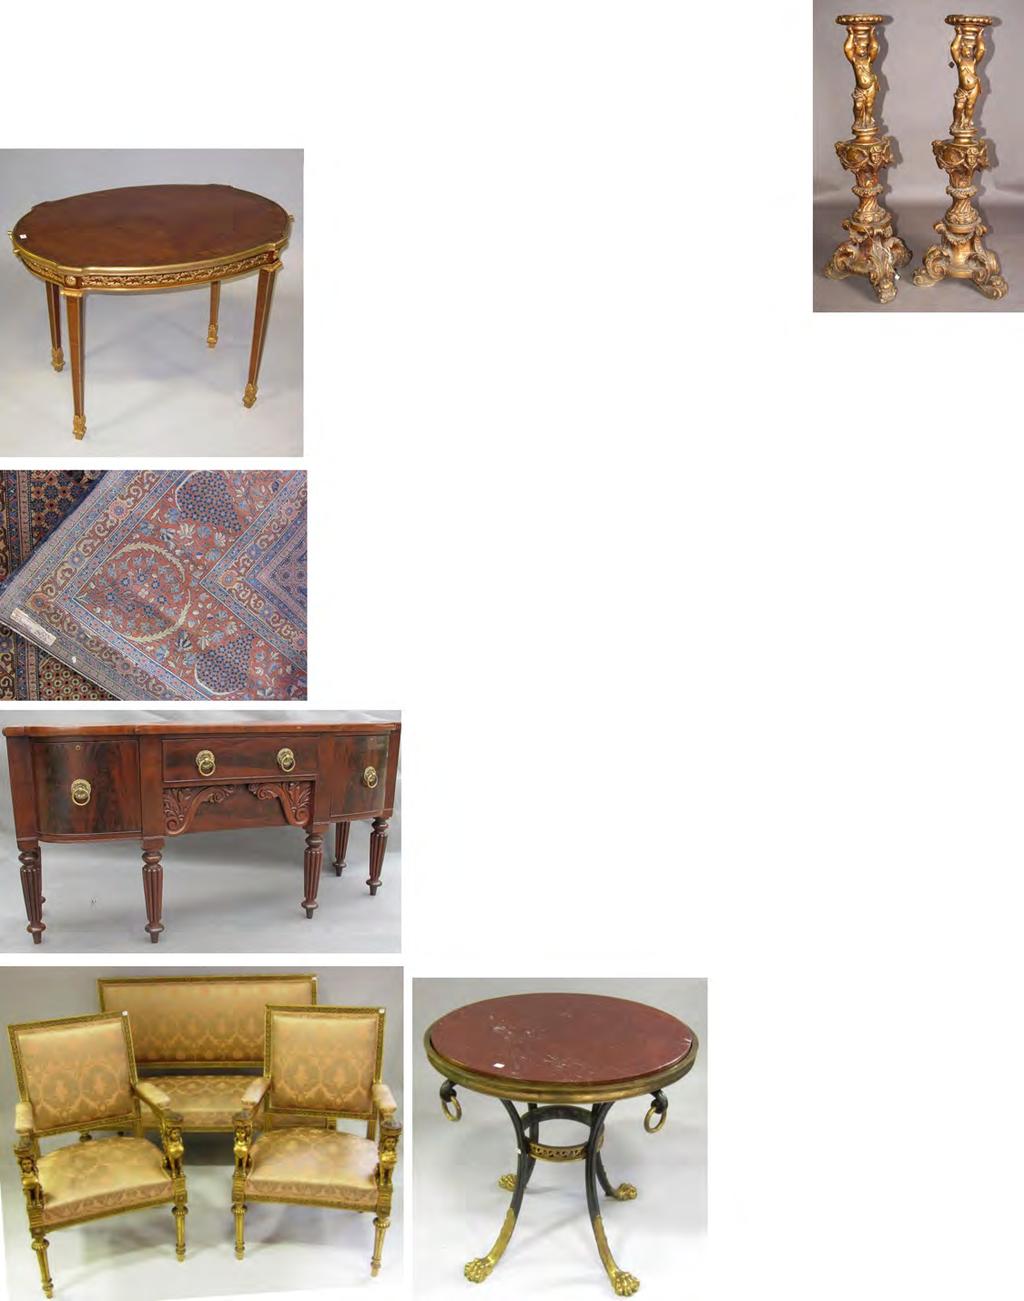 33 Peachtree & Bennett 232 ANTIQUE LOUIS XVI MARBLE TOP SIDE TABLE: with a pierced brass gallery, and mahogany cylindrical roll top. On brass capped tapering column legs. Very good condition.